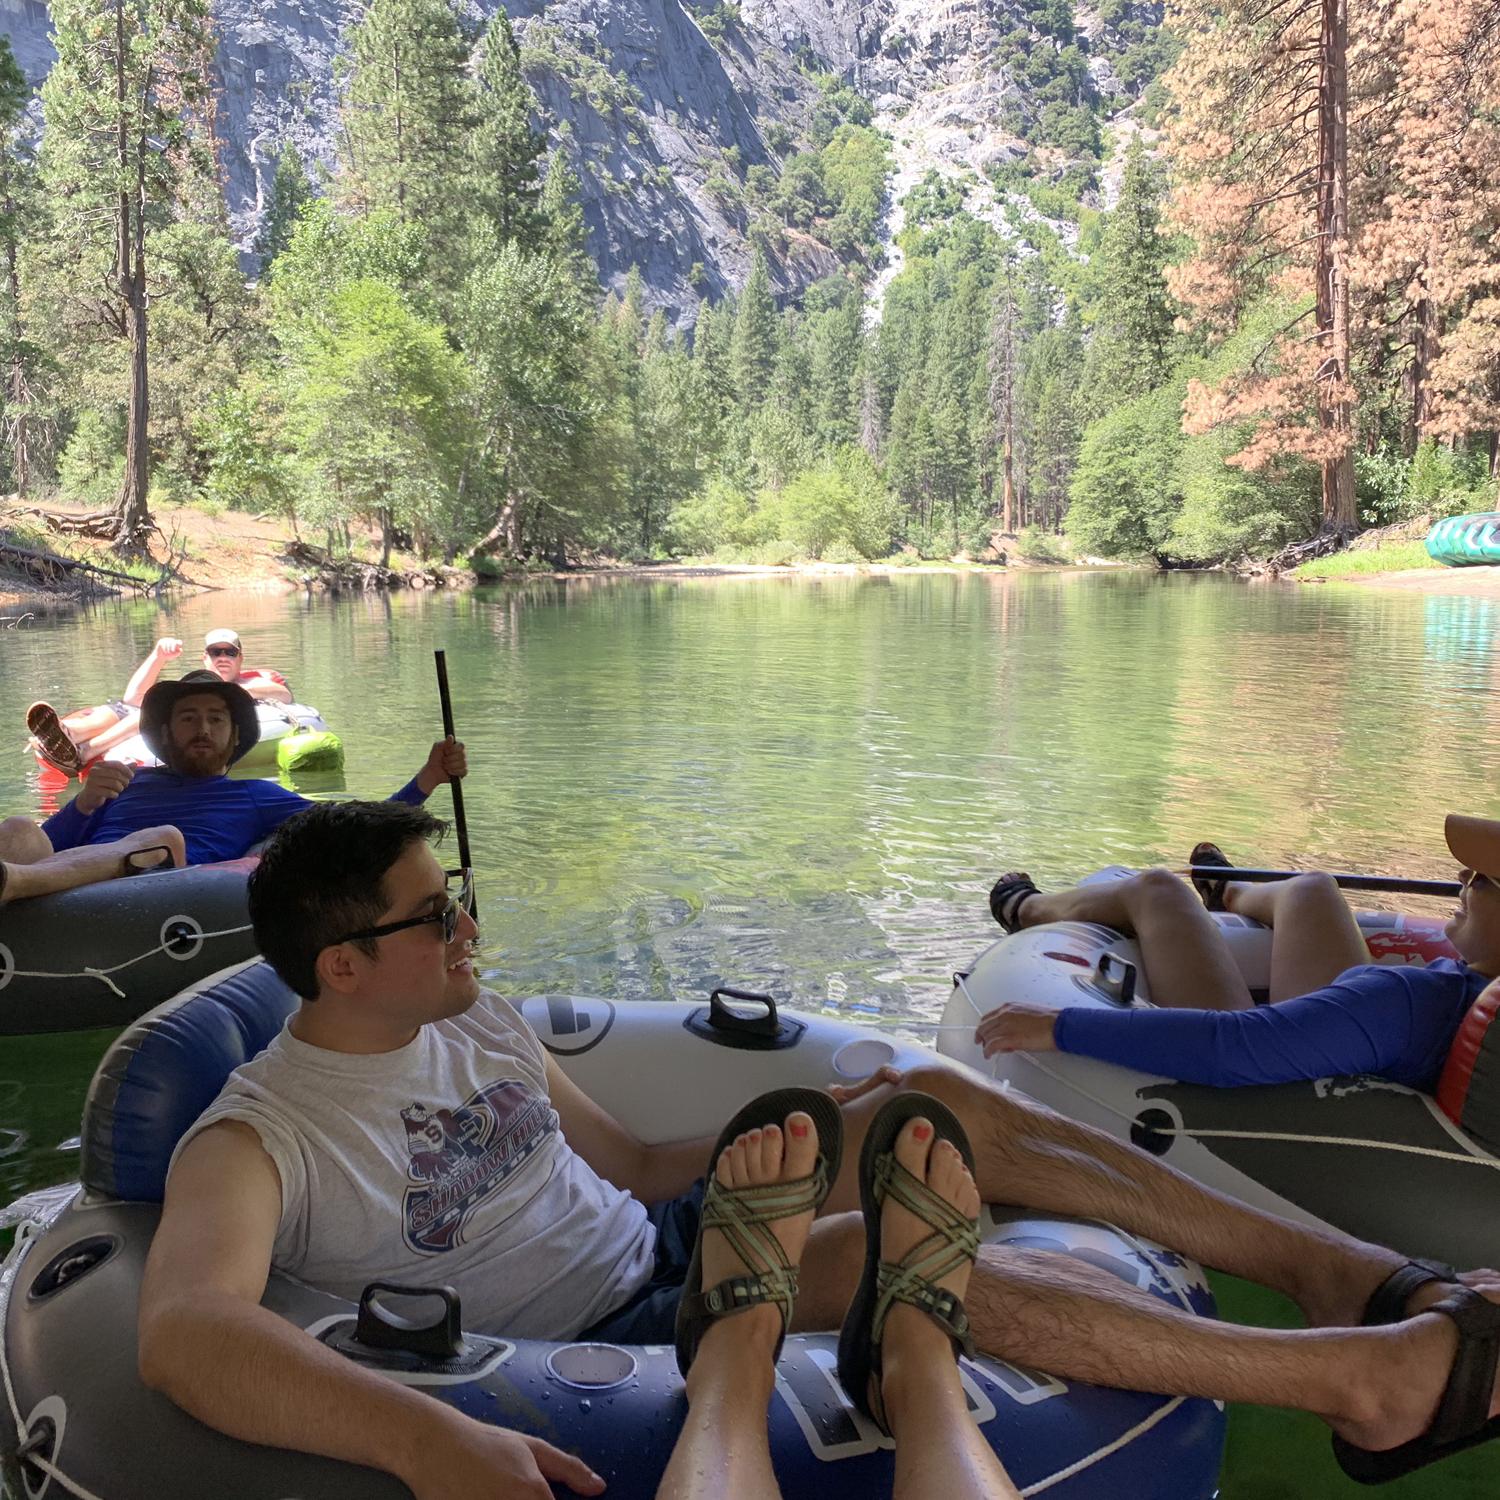 Floating the Merced River in Yosemite.